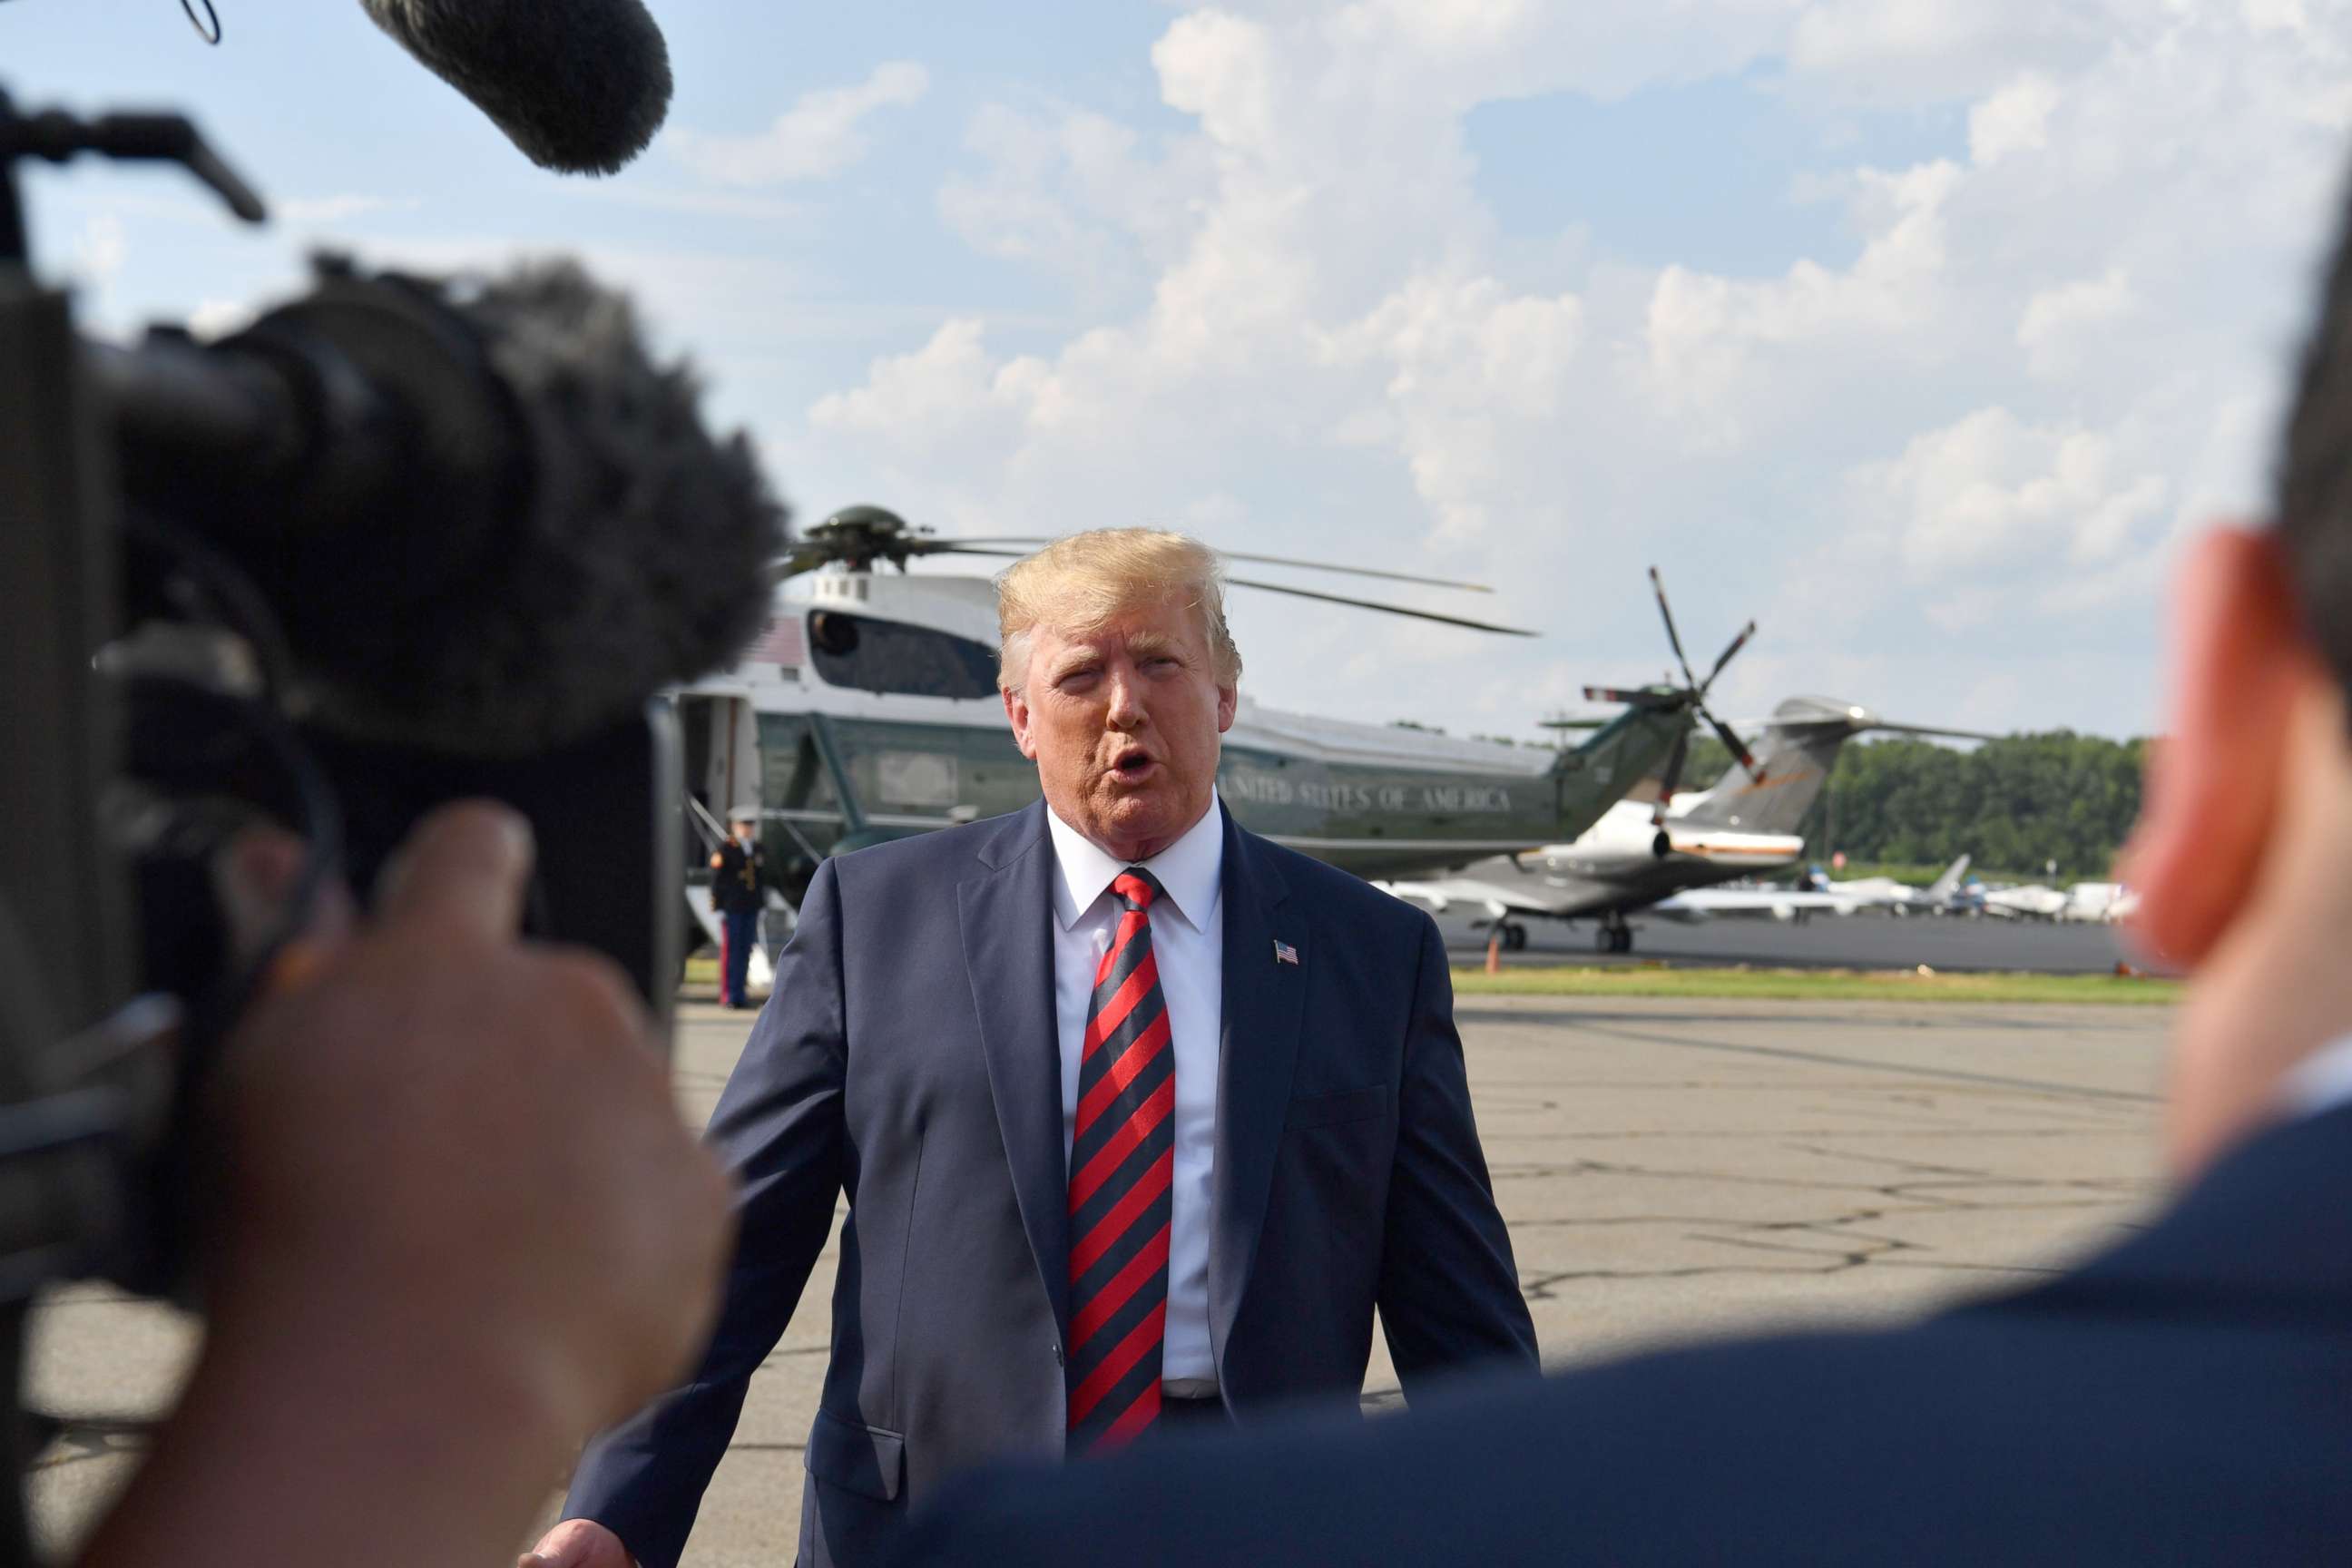 PHOTO: President Donald Trump speaks to the press before boarding Air Force One in Morristown, N.J., Aug. 18, 2019.